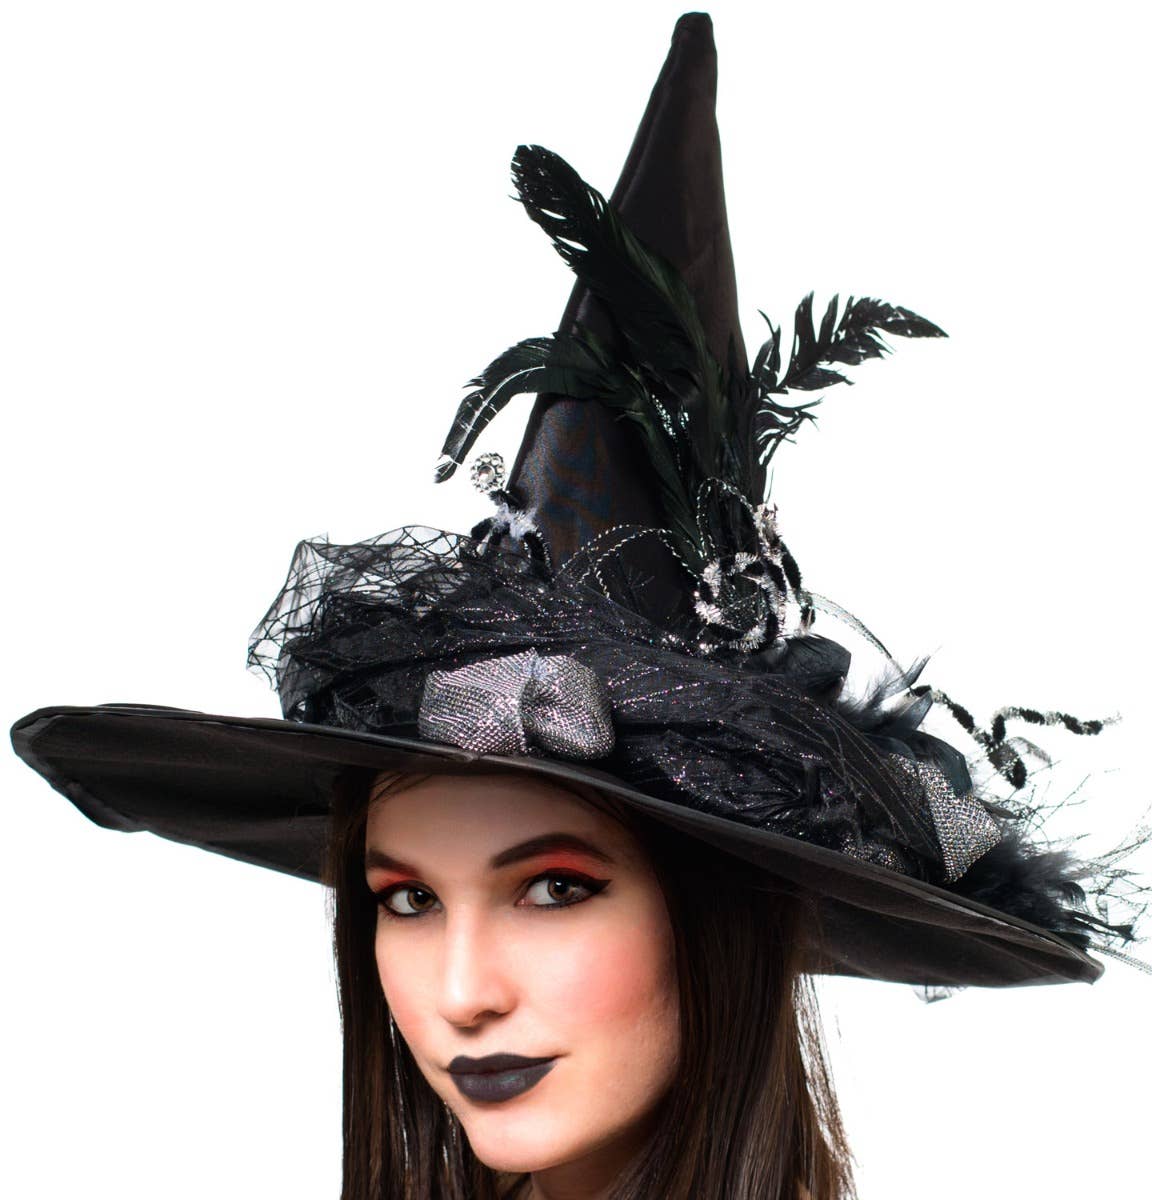 Black Halloween Women's Witch Hat With Silver Flowers and Black Feathers Costume Accessory Close Up Image